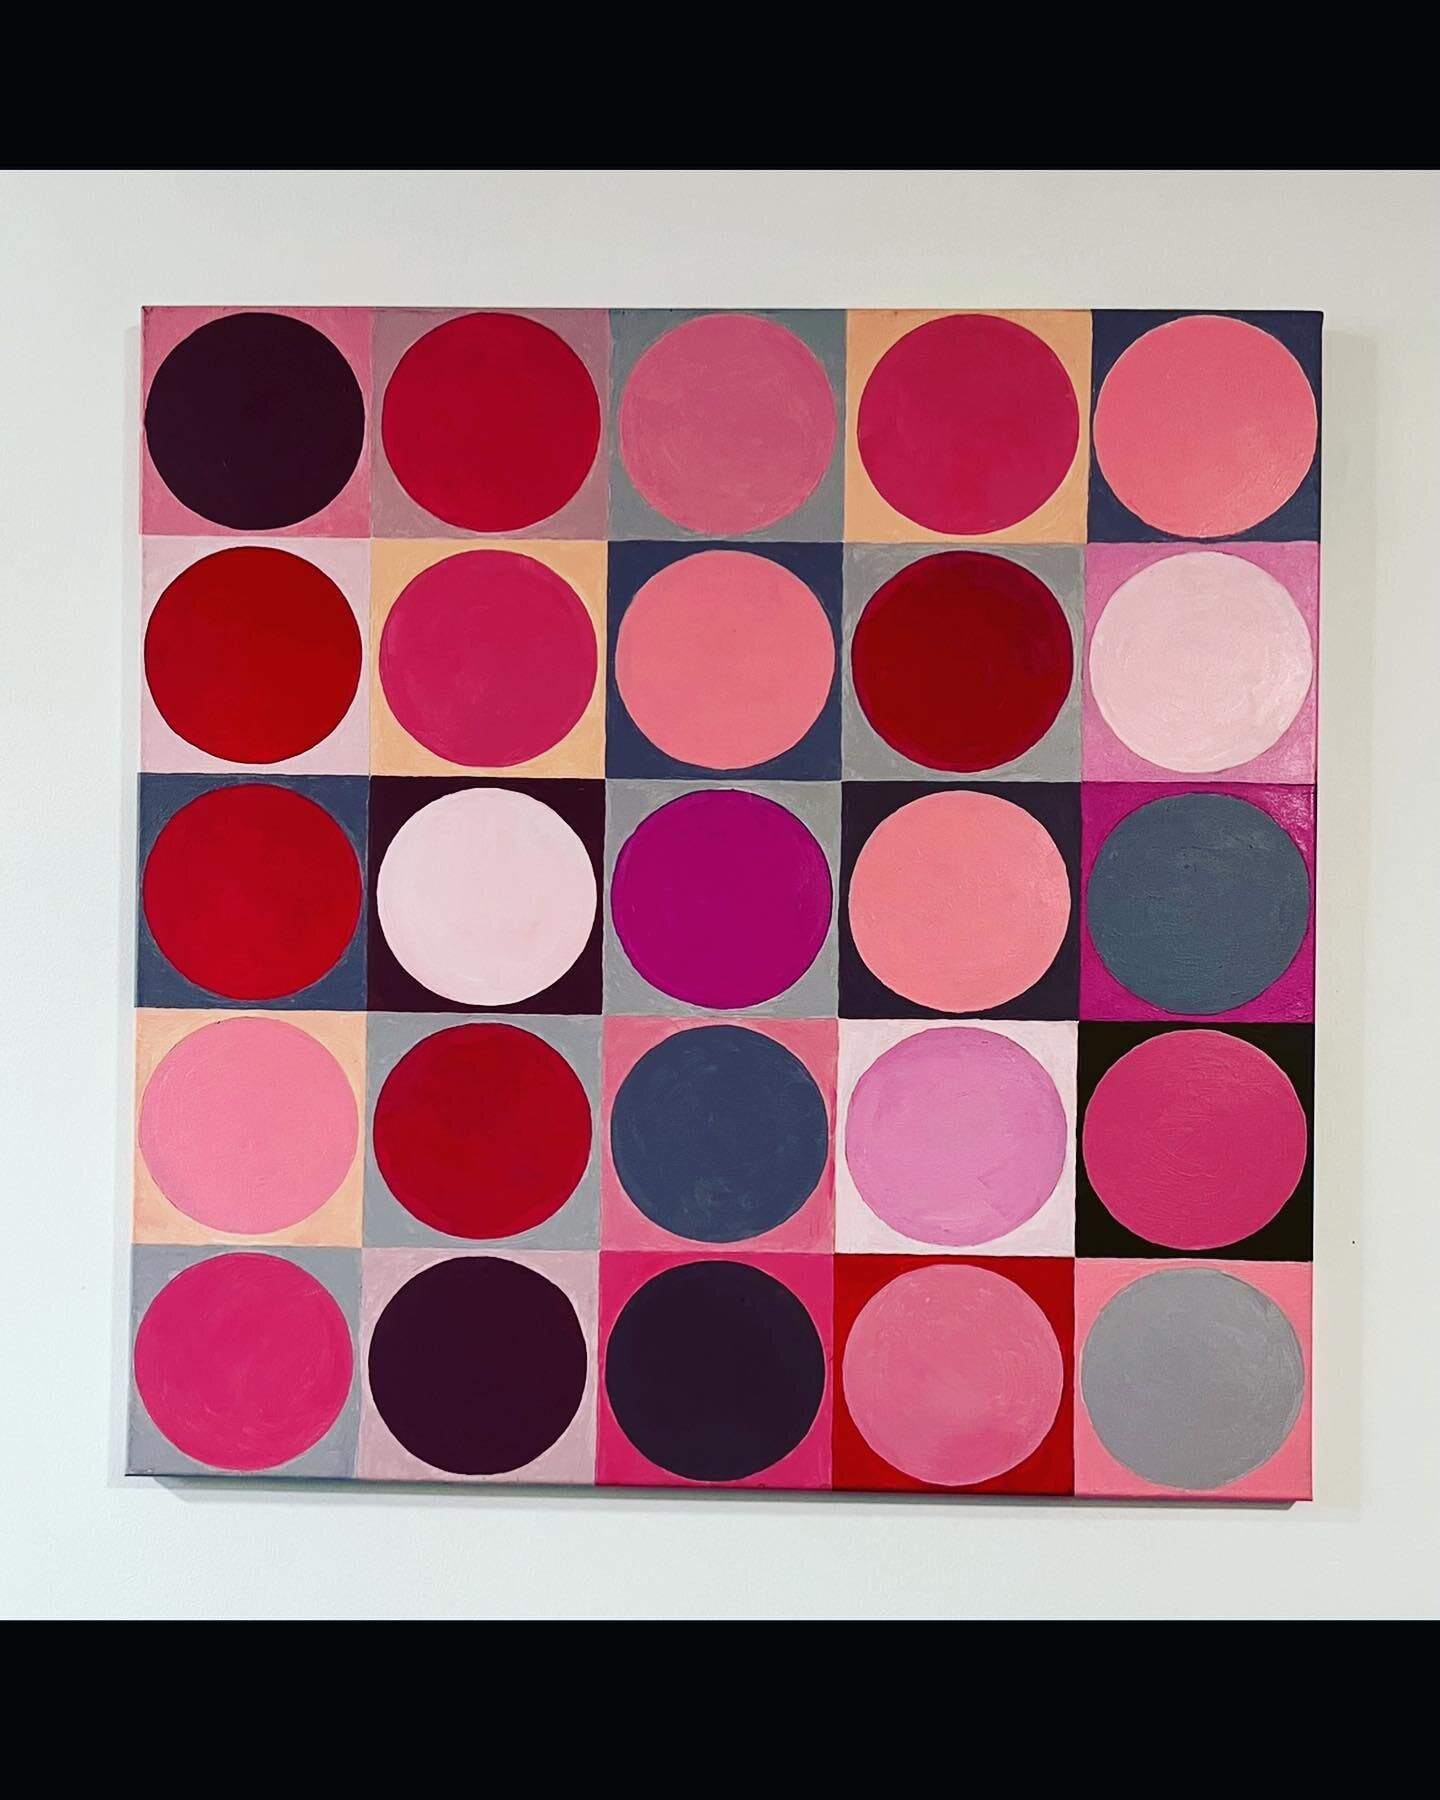 TBT Pink Circle of life 80x80cms &pound;450 i&rsquo;ve been asked to paint more of these &lsquo;circle&rsquo; paintings, thinking about new colourways, any ideas/requests?! #throwbackthursday #acrylicpainting #acryliconcanvas #pinkpainting #colourful